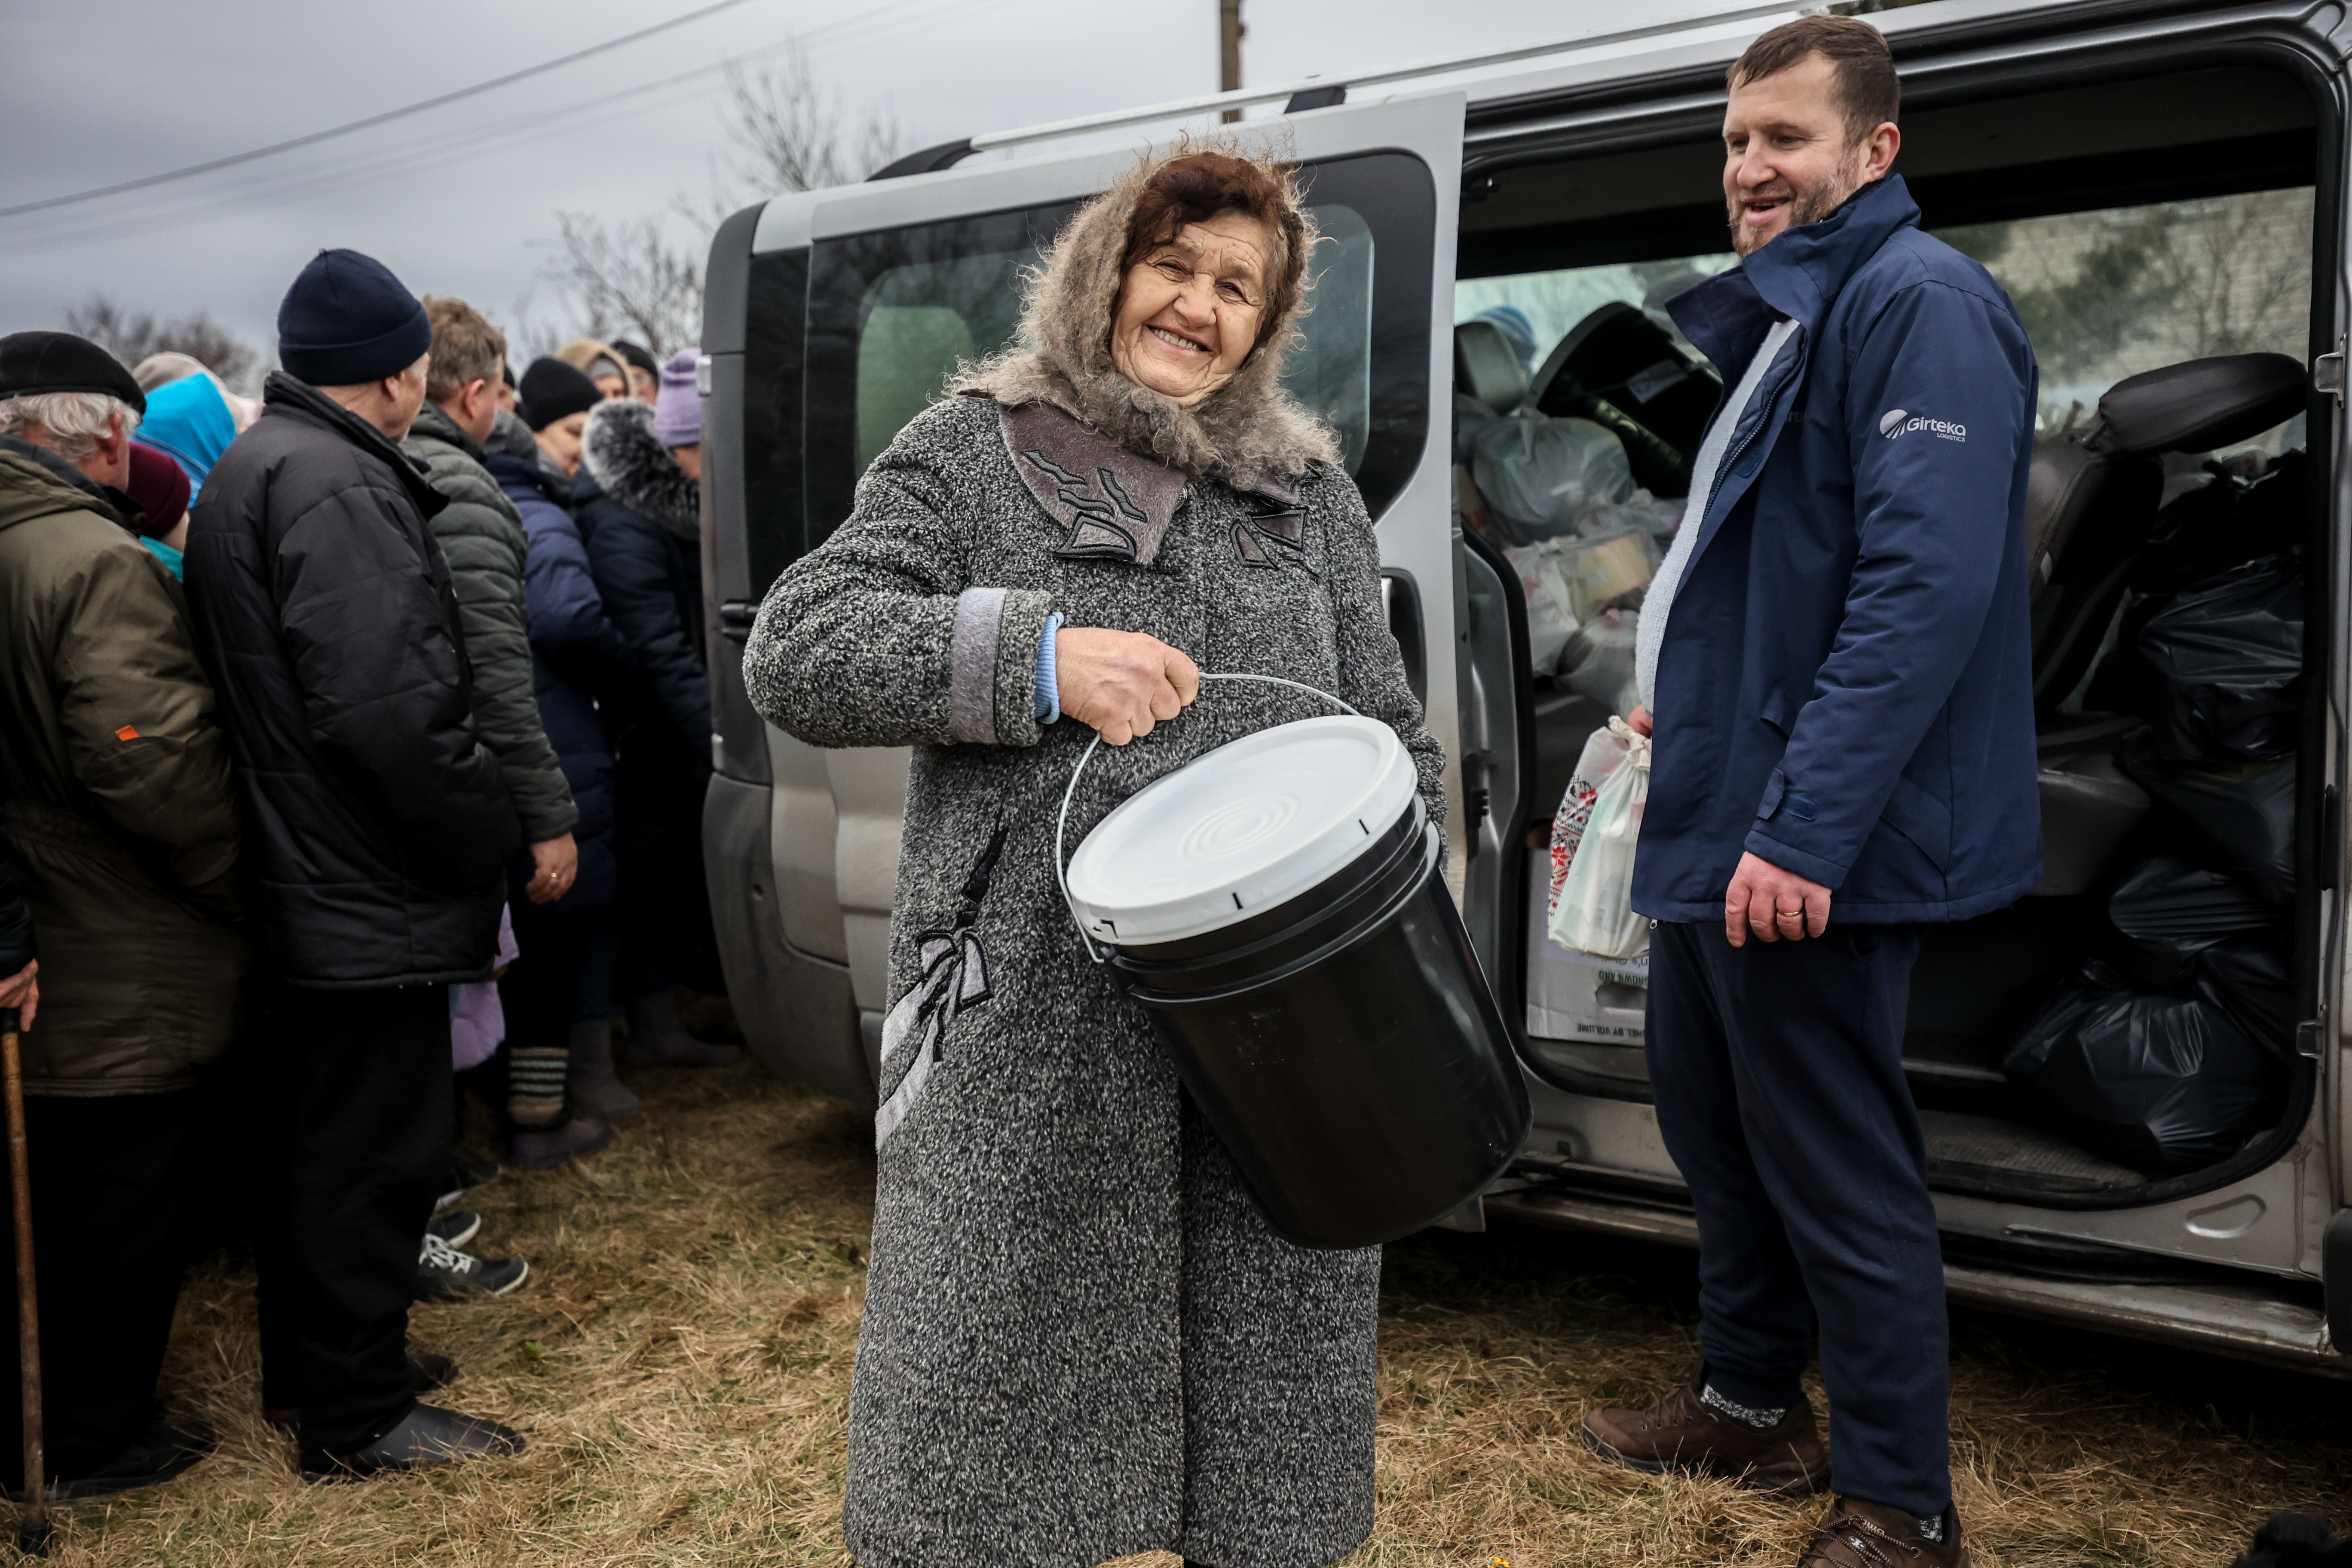 A woman* in a village recovered from Russian military control in Ukraine's Kherson region received an MCC relief kit from MCC partner Charitable Foundation Uman Help Center (Uman Help Center).